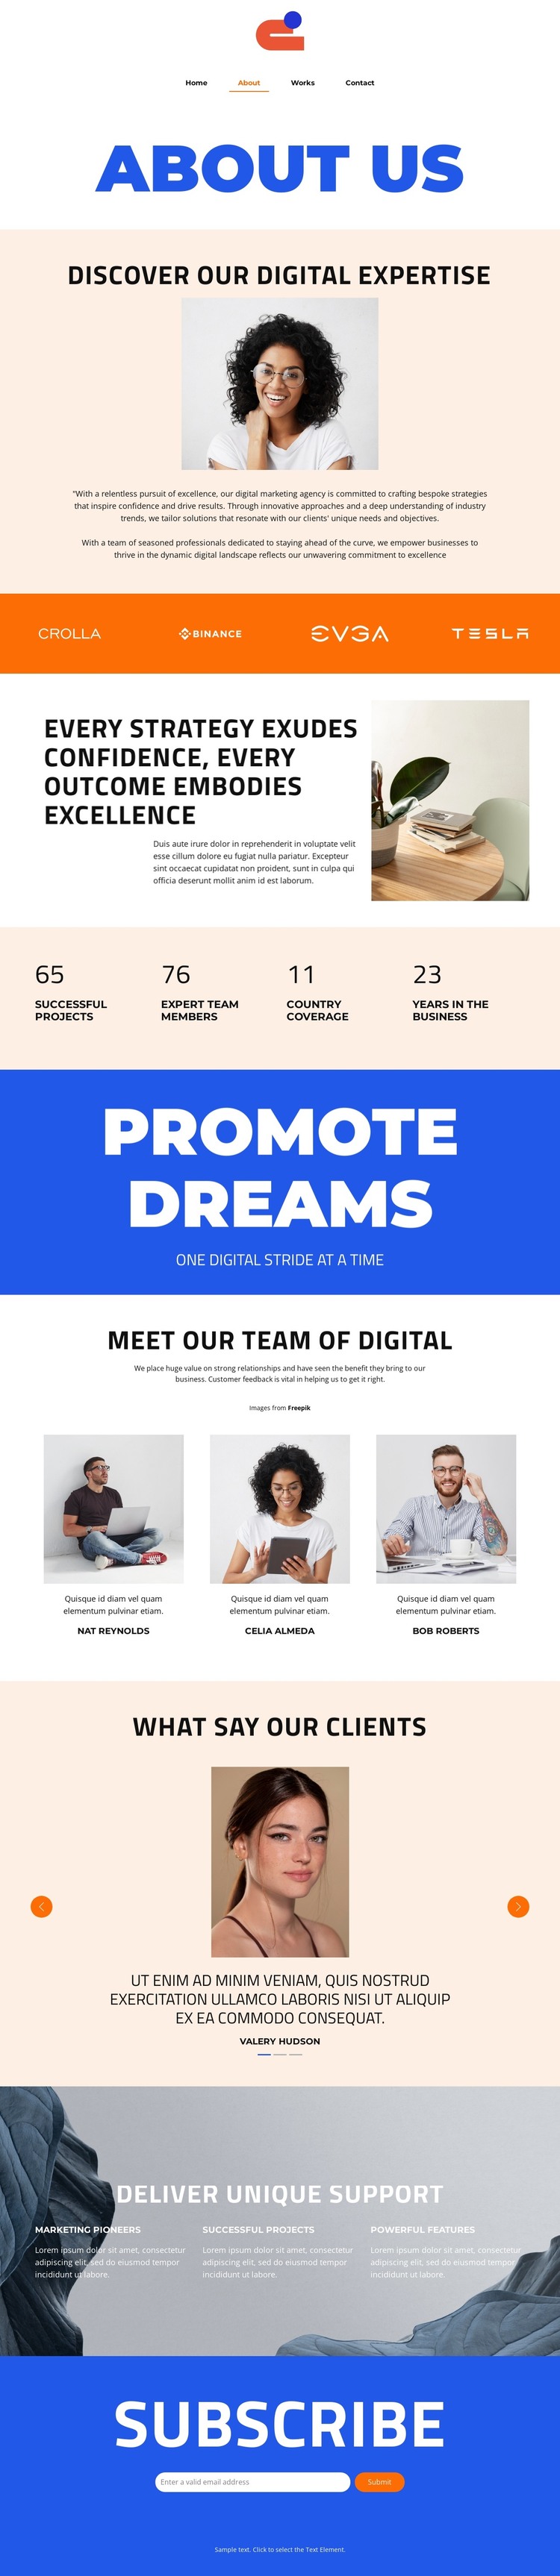 One digital stride at a time HTML Template